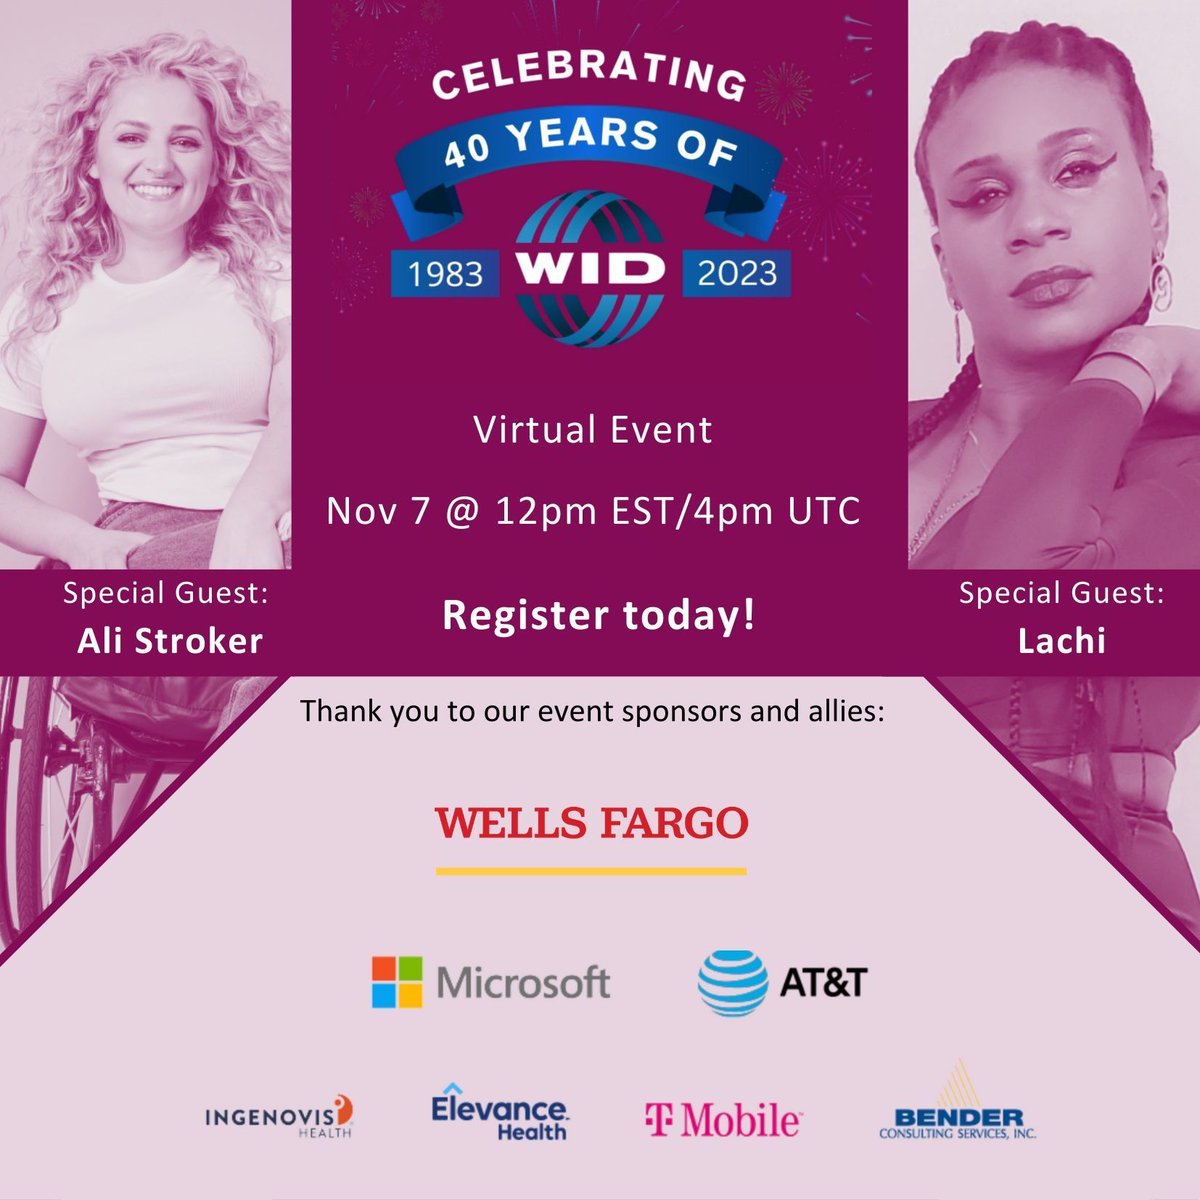 Register now for our 40th anniversary virtual celebration on November 7! We are thrilled to announce two incredible performers for our virtual celebration: @AliStroker and @Lachimusic! Register here: buff.ly/3s10wEH